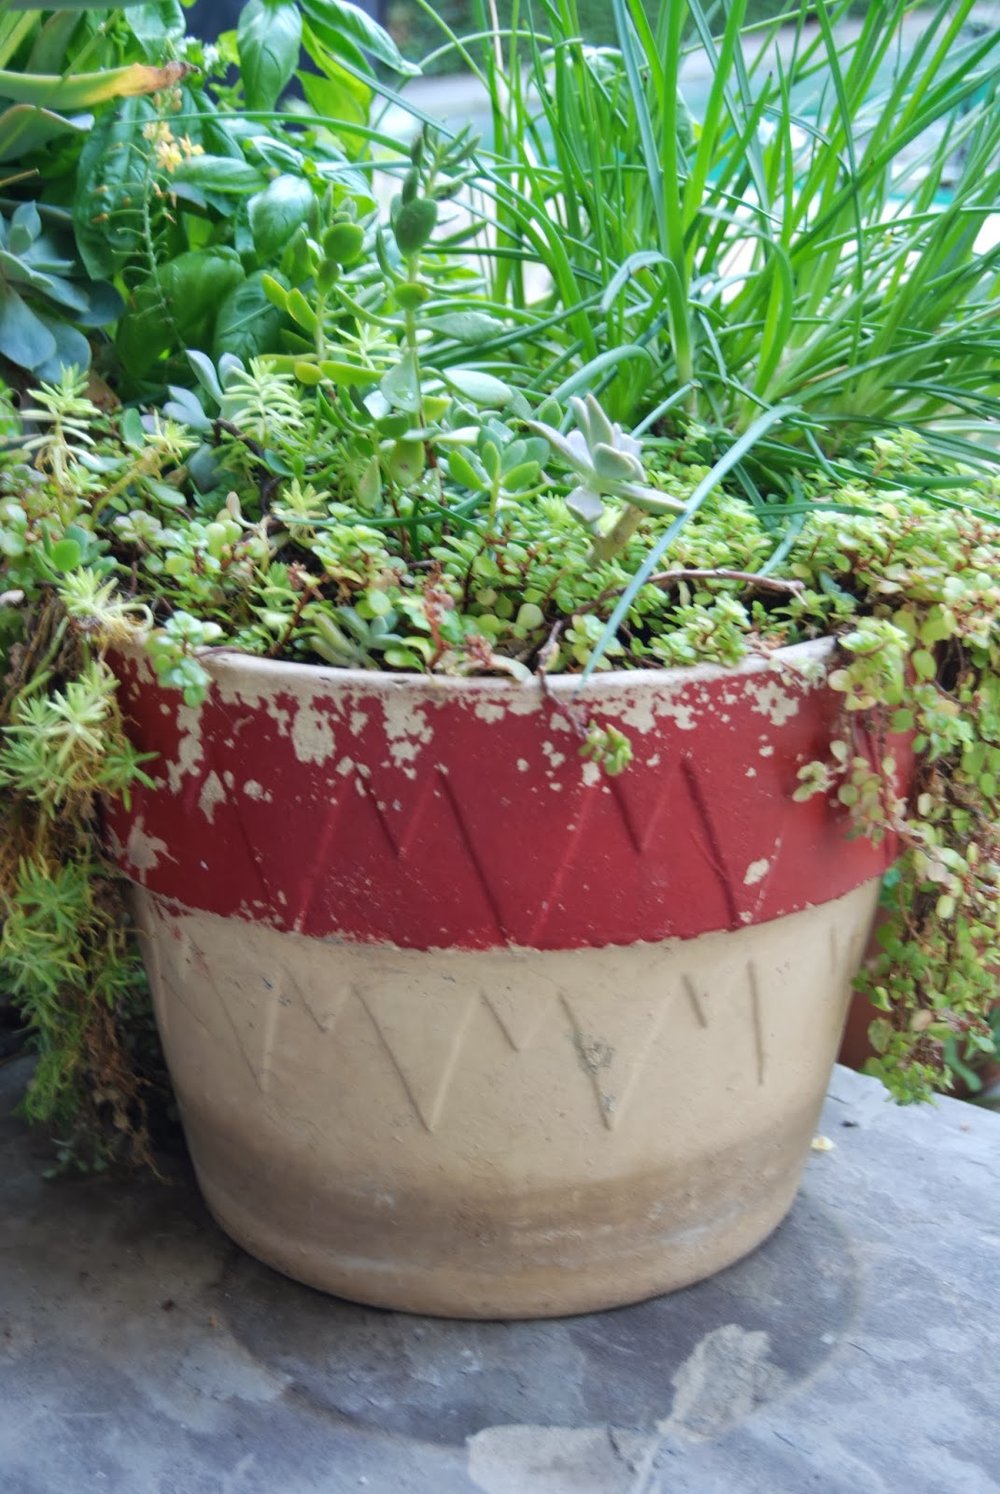  Vintage red and cream planter